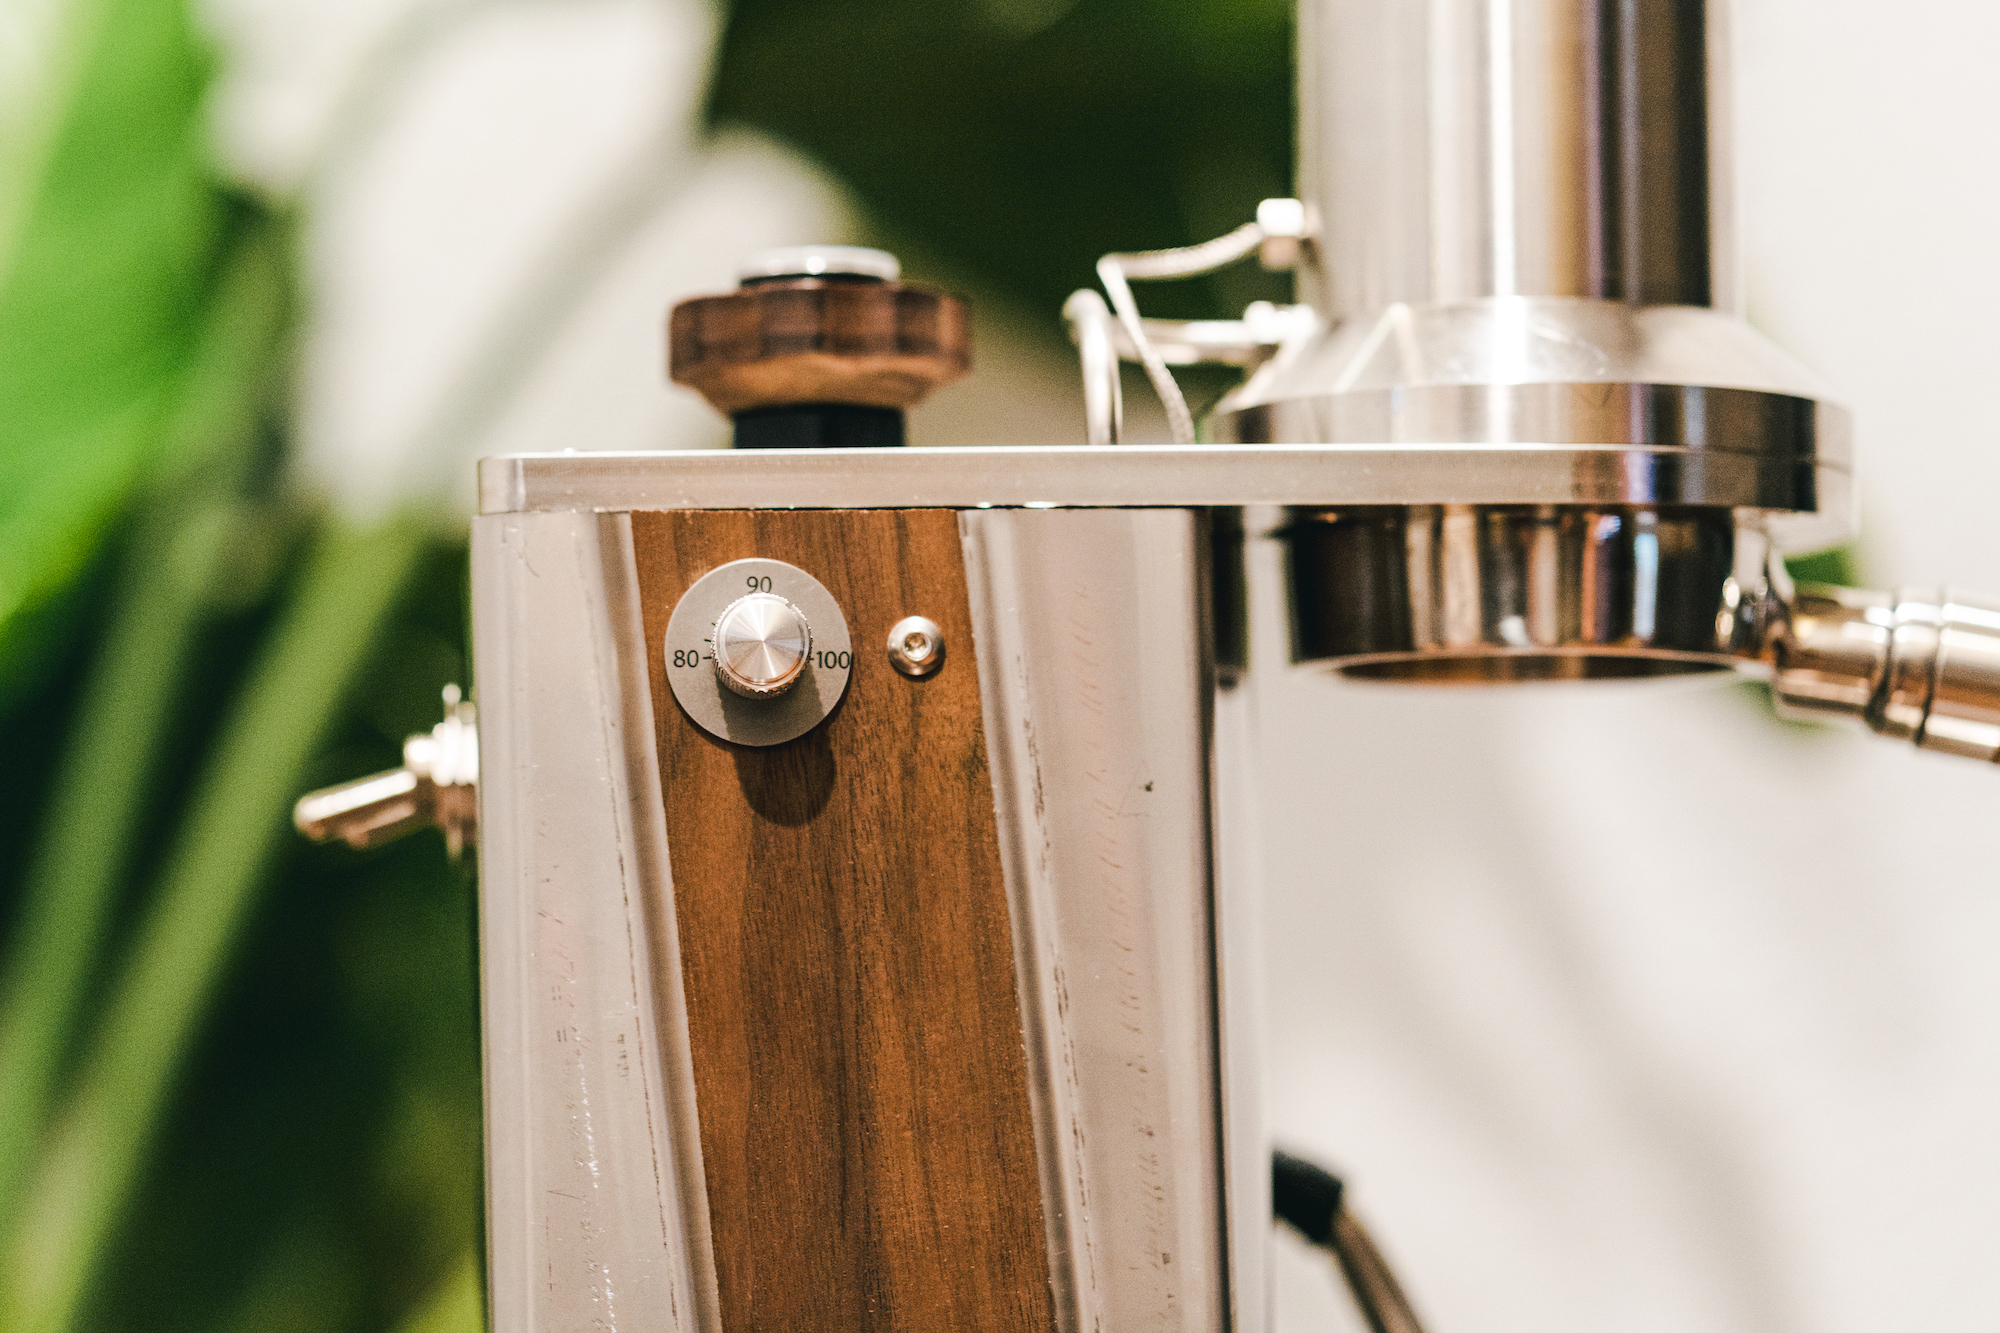 Odyssey Espresso Begins its Journey with the Argos Manual Lever